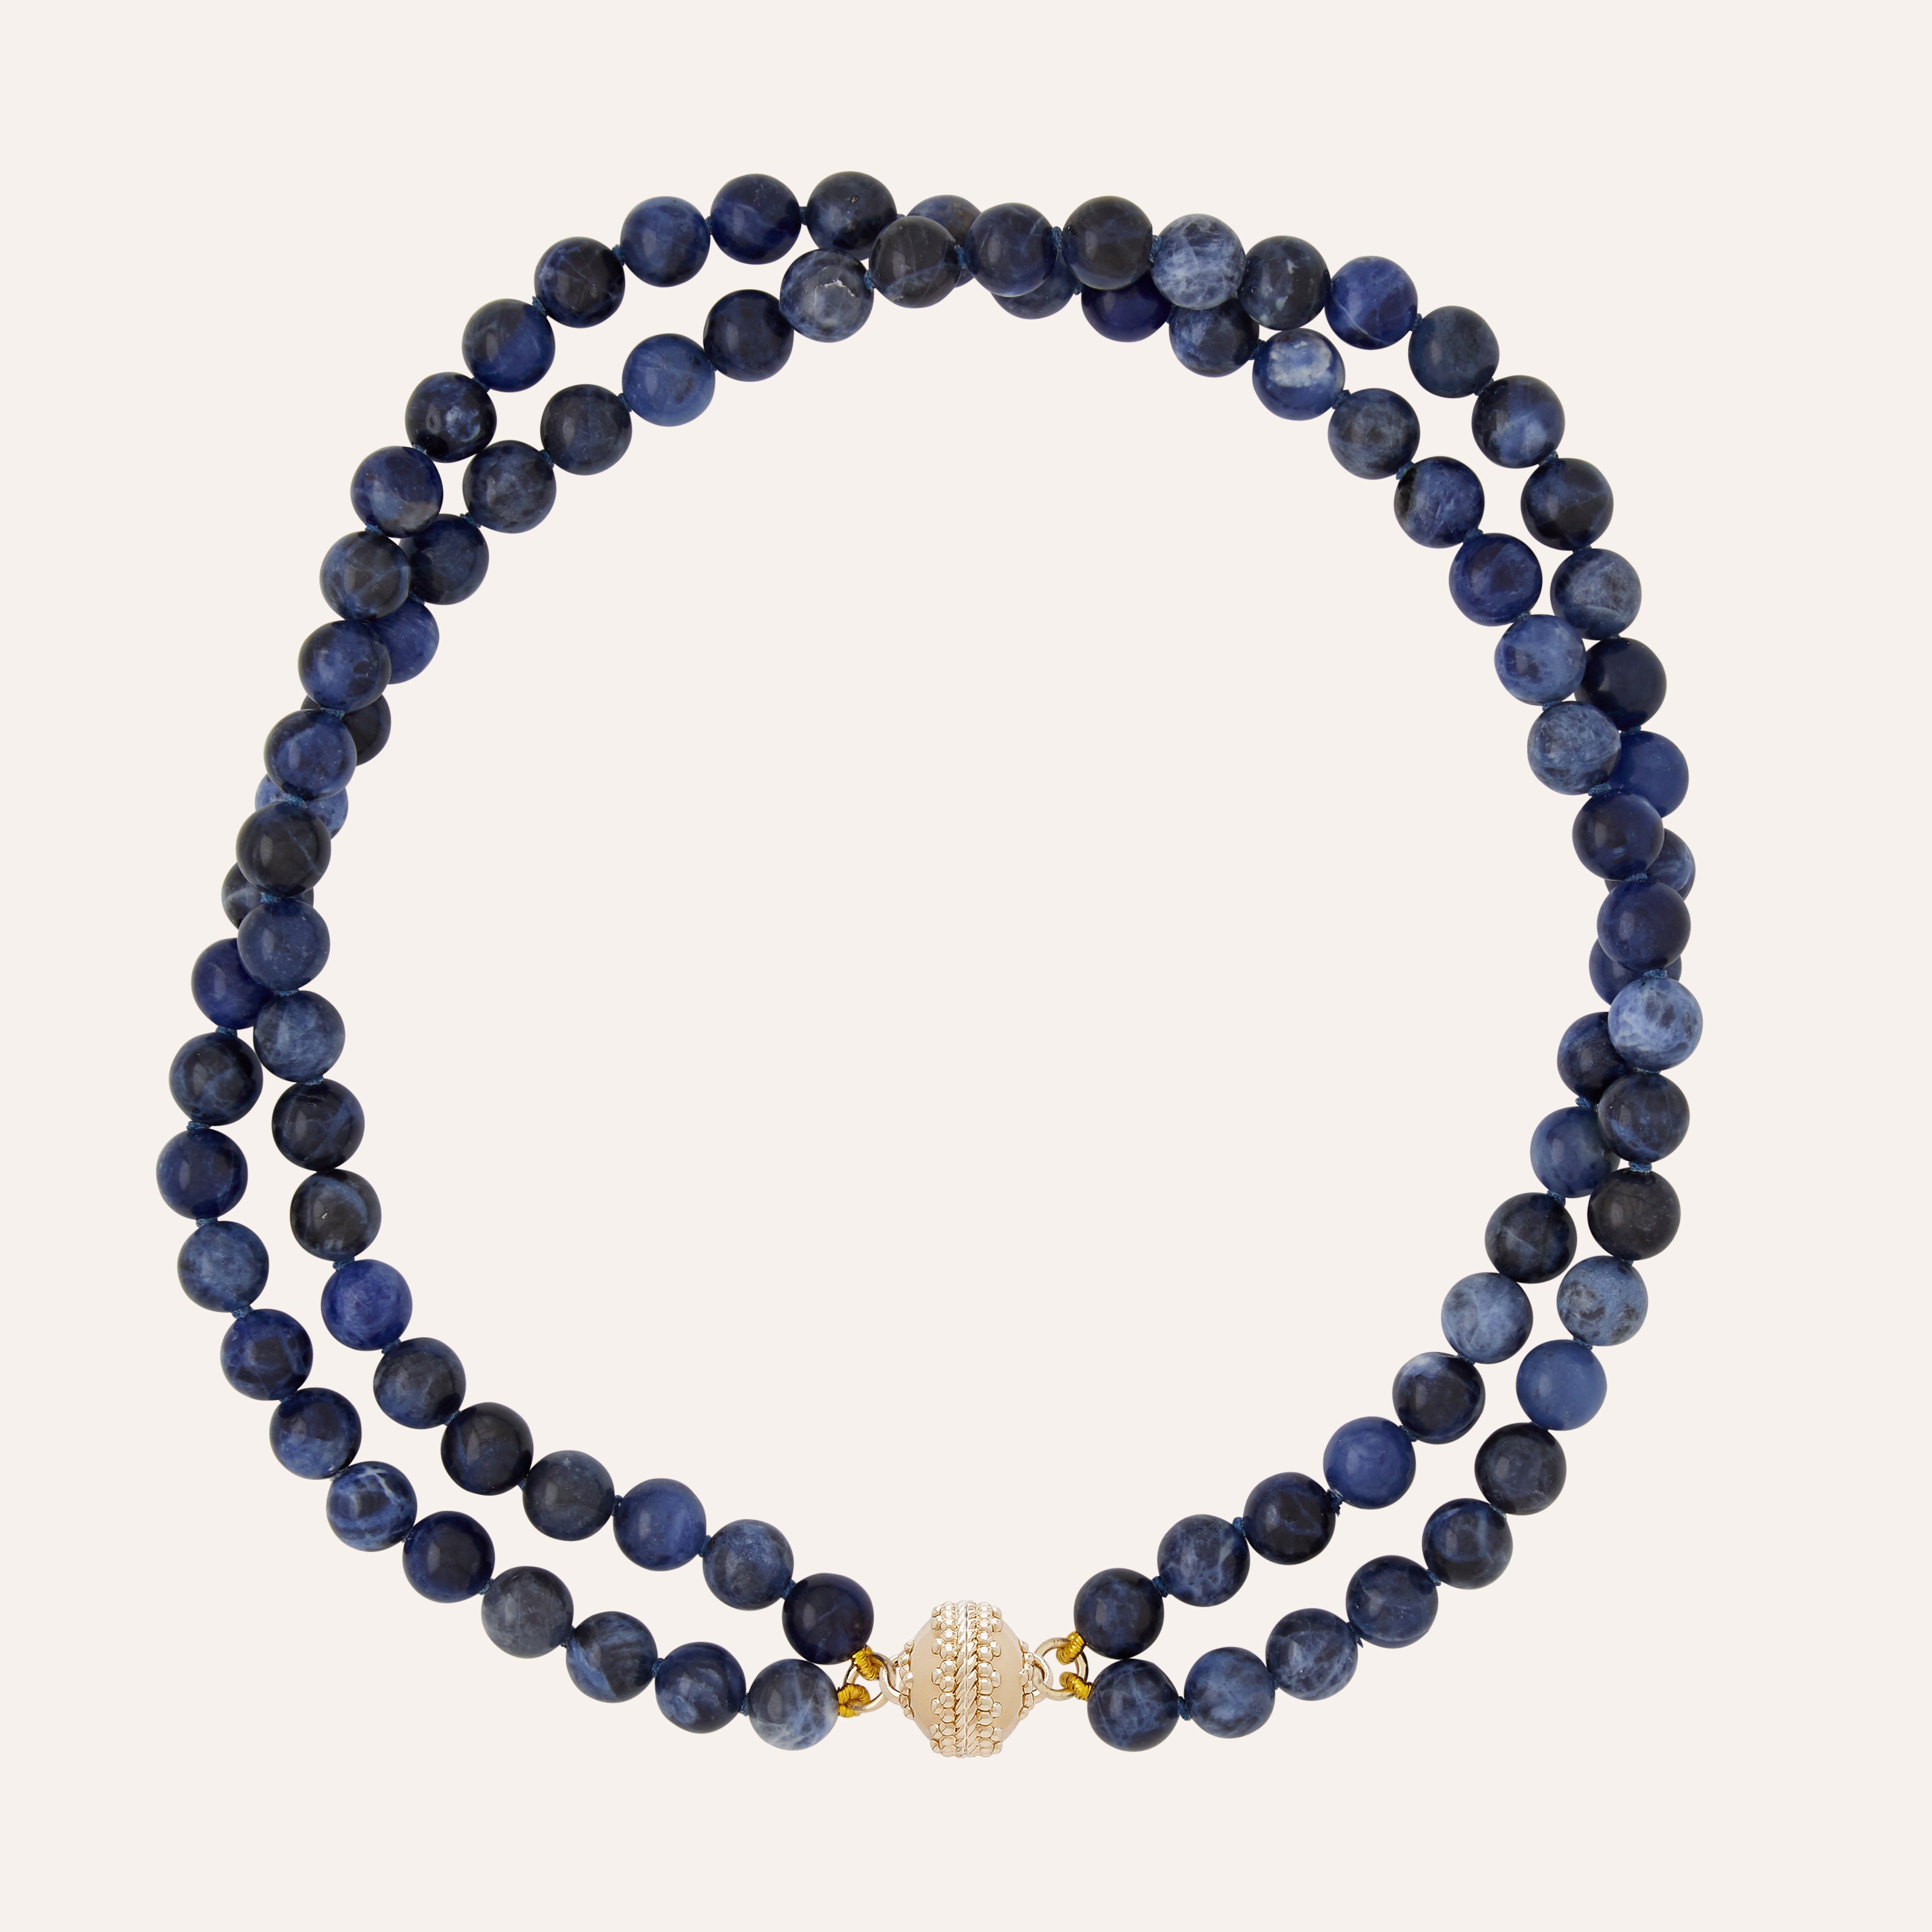 Victoire Blue Sodalite 8mm Double Strand Necklace